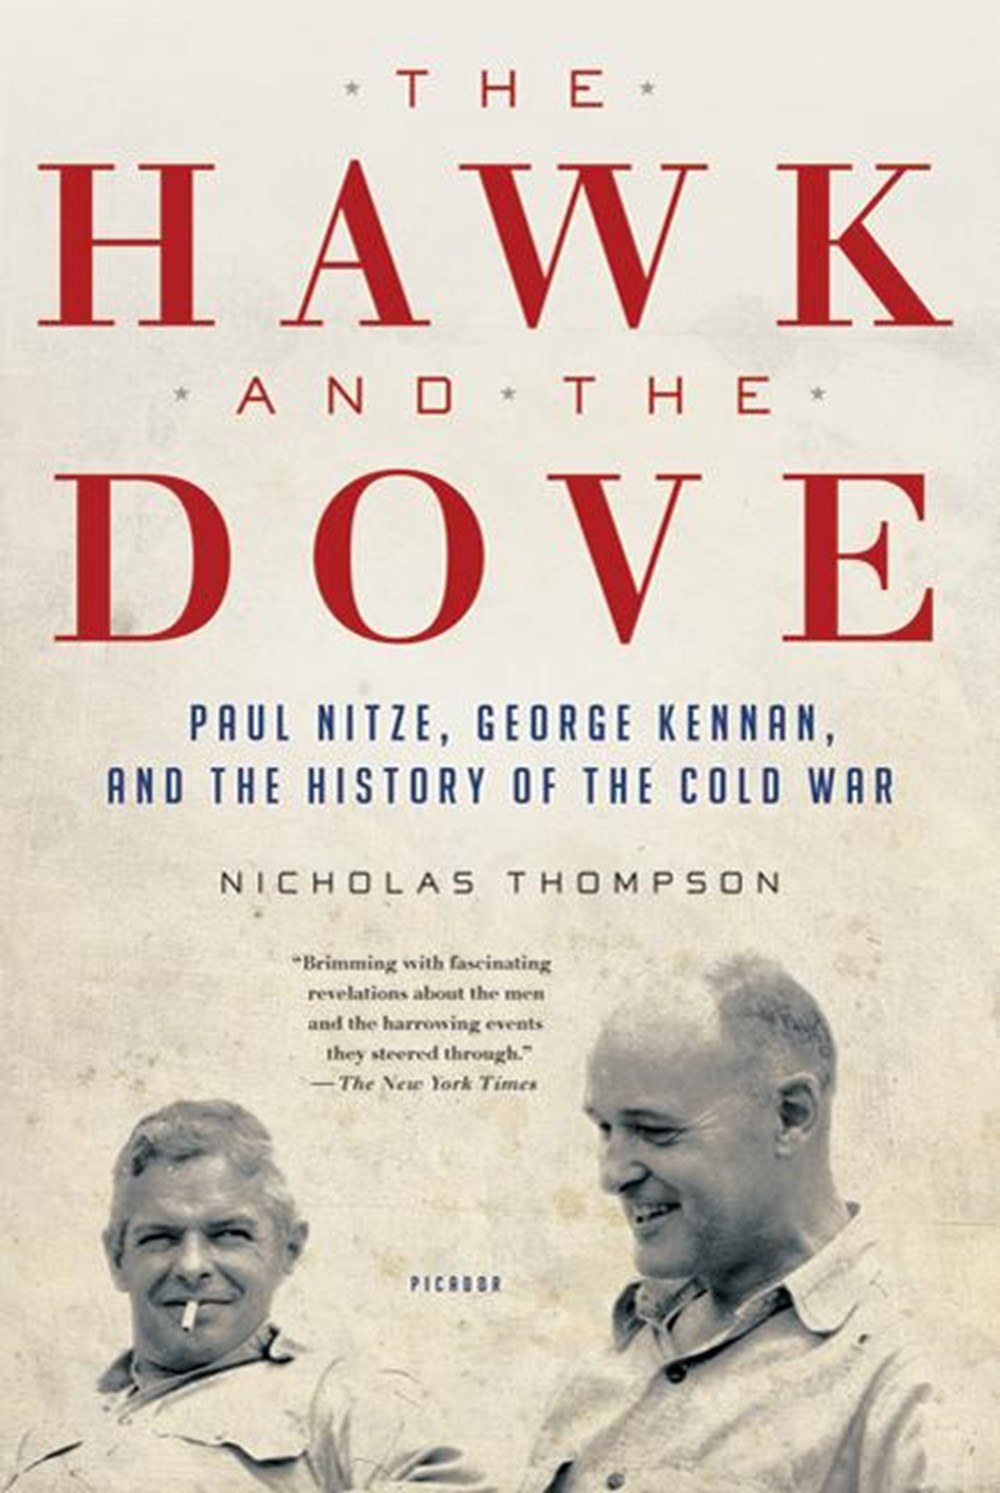 Hawk and the Dove: Paul Nitze, George Kennan, and the History of the Cold War